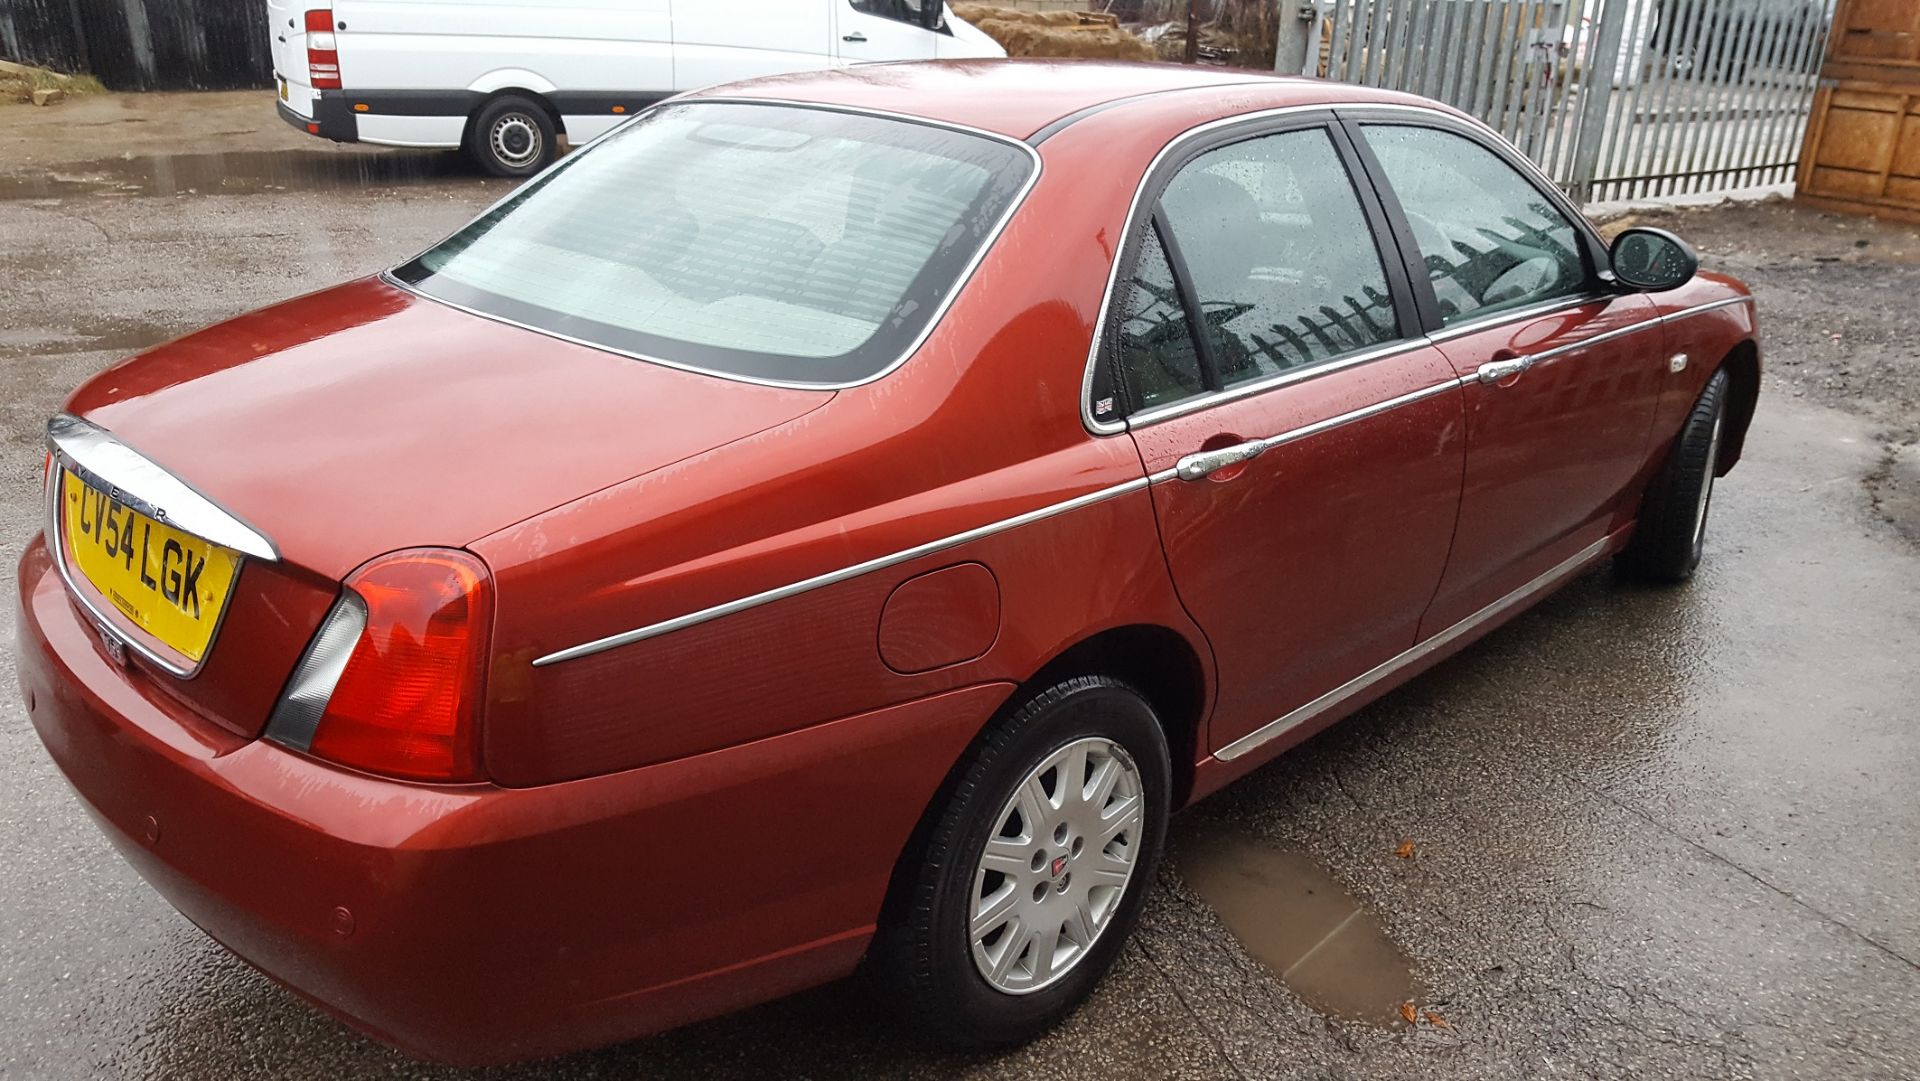 2004/54 ROVER 75 CLASSIC 45,000 MILES ! RED PETROL 4 DOOR SALOON, SHOWING 1 FORMER KEEPER *NO VAT* - Image 3 of 8